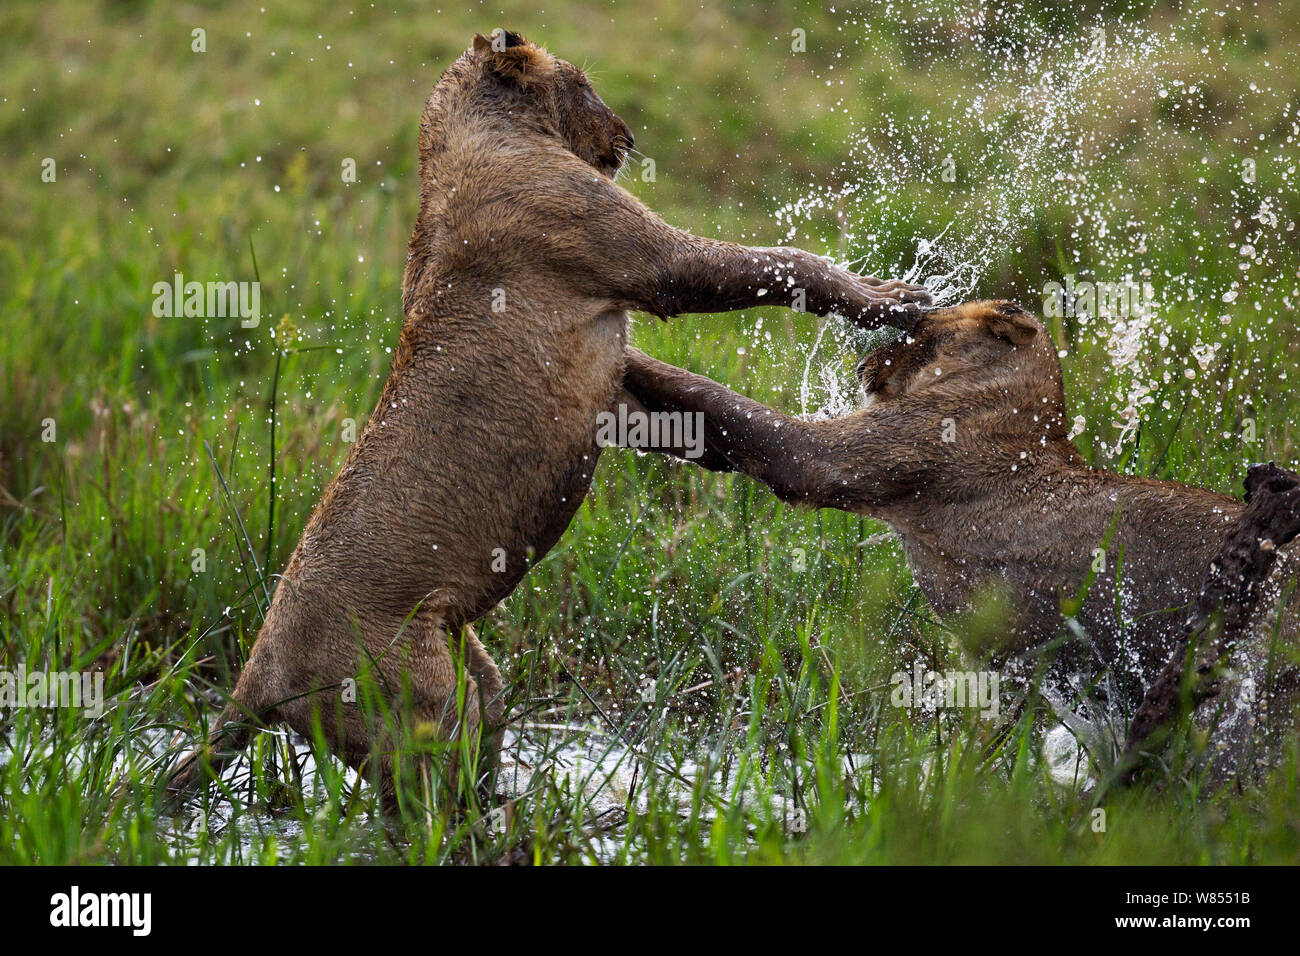 African lions (Panthera leo) two young lions play fighting in water, Masai Mara National Reserve, Kenya, September Stock Photo